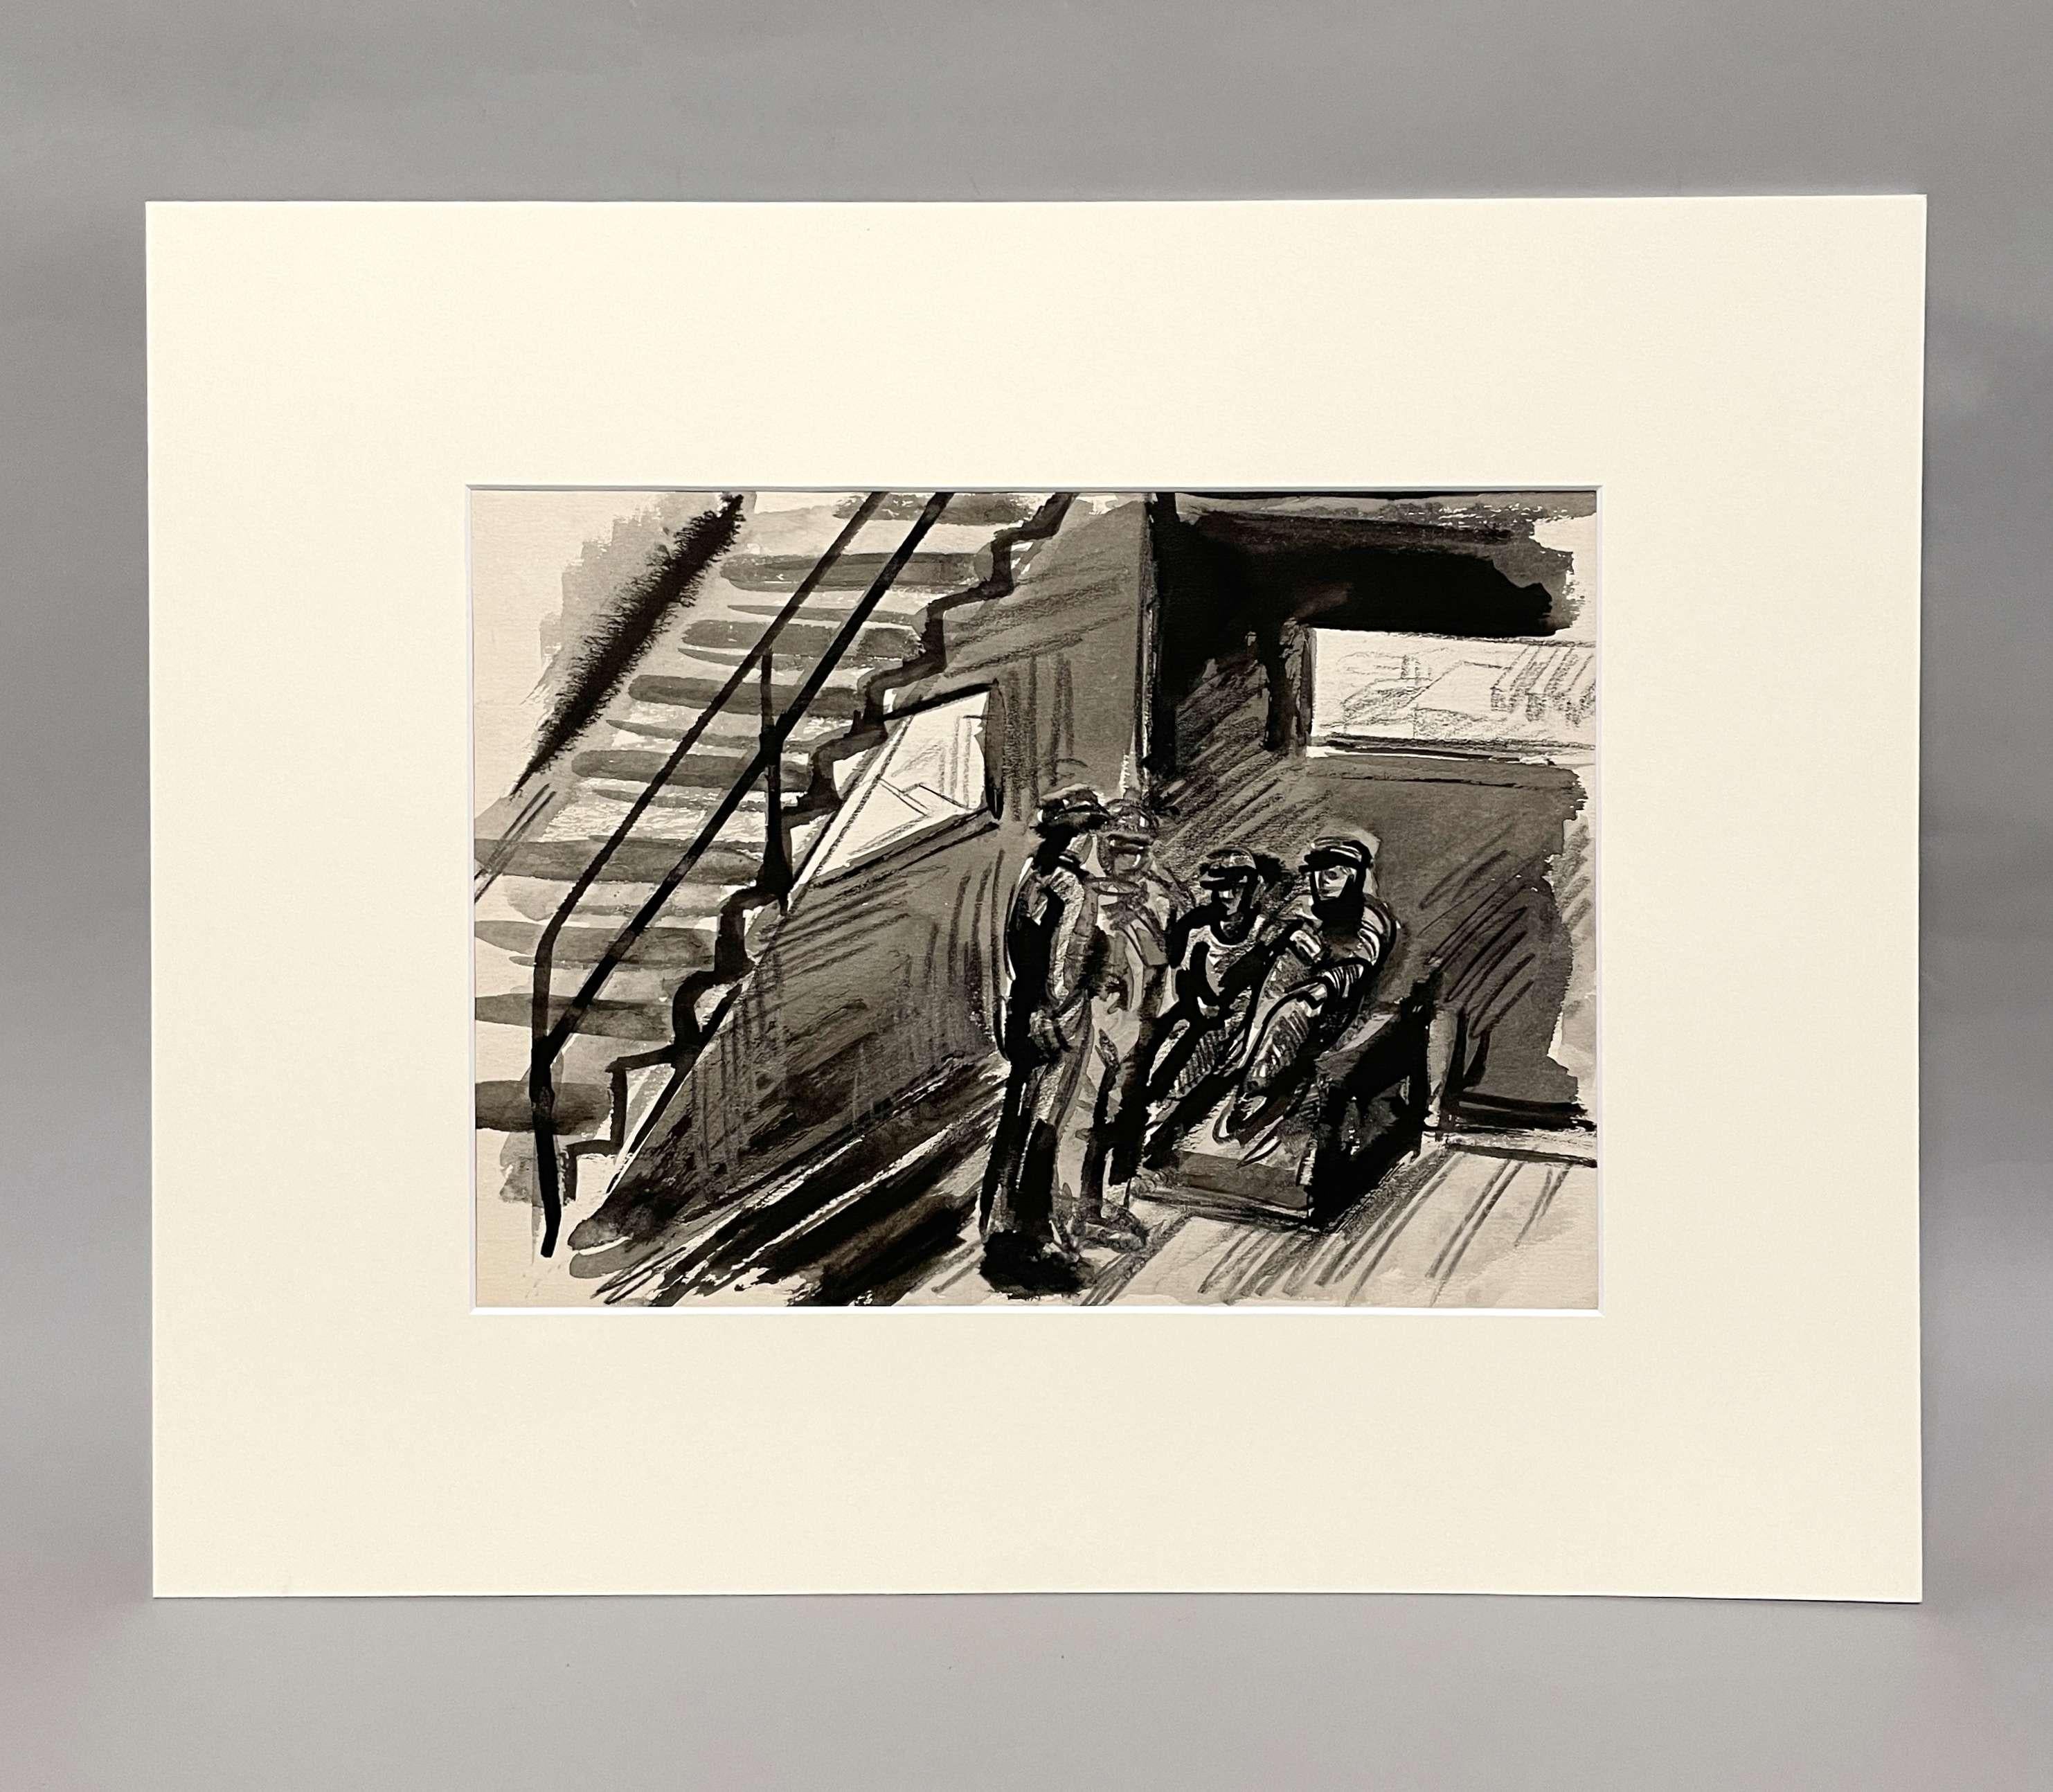 A tonal, watercolor of a steel mill by artist Harold Haydon.

Harold Emerson Haydon was born in Fort William, Ontario, Canada in 1909.   Haydon came to Chicago with his family in 1917 and became a naturalized American citizen in 1941.  He attended